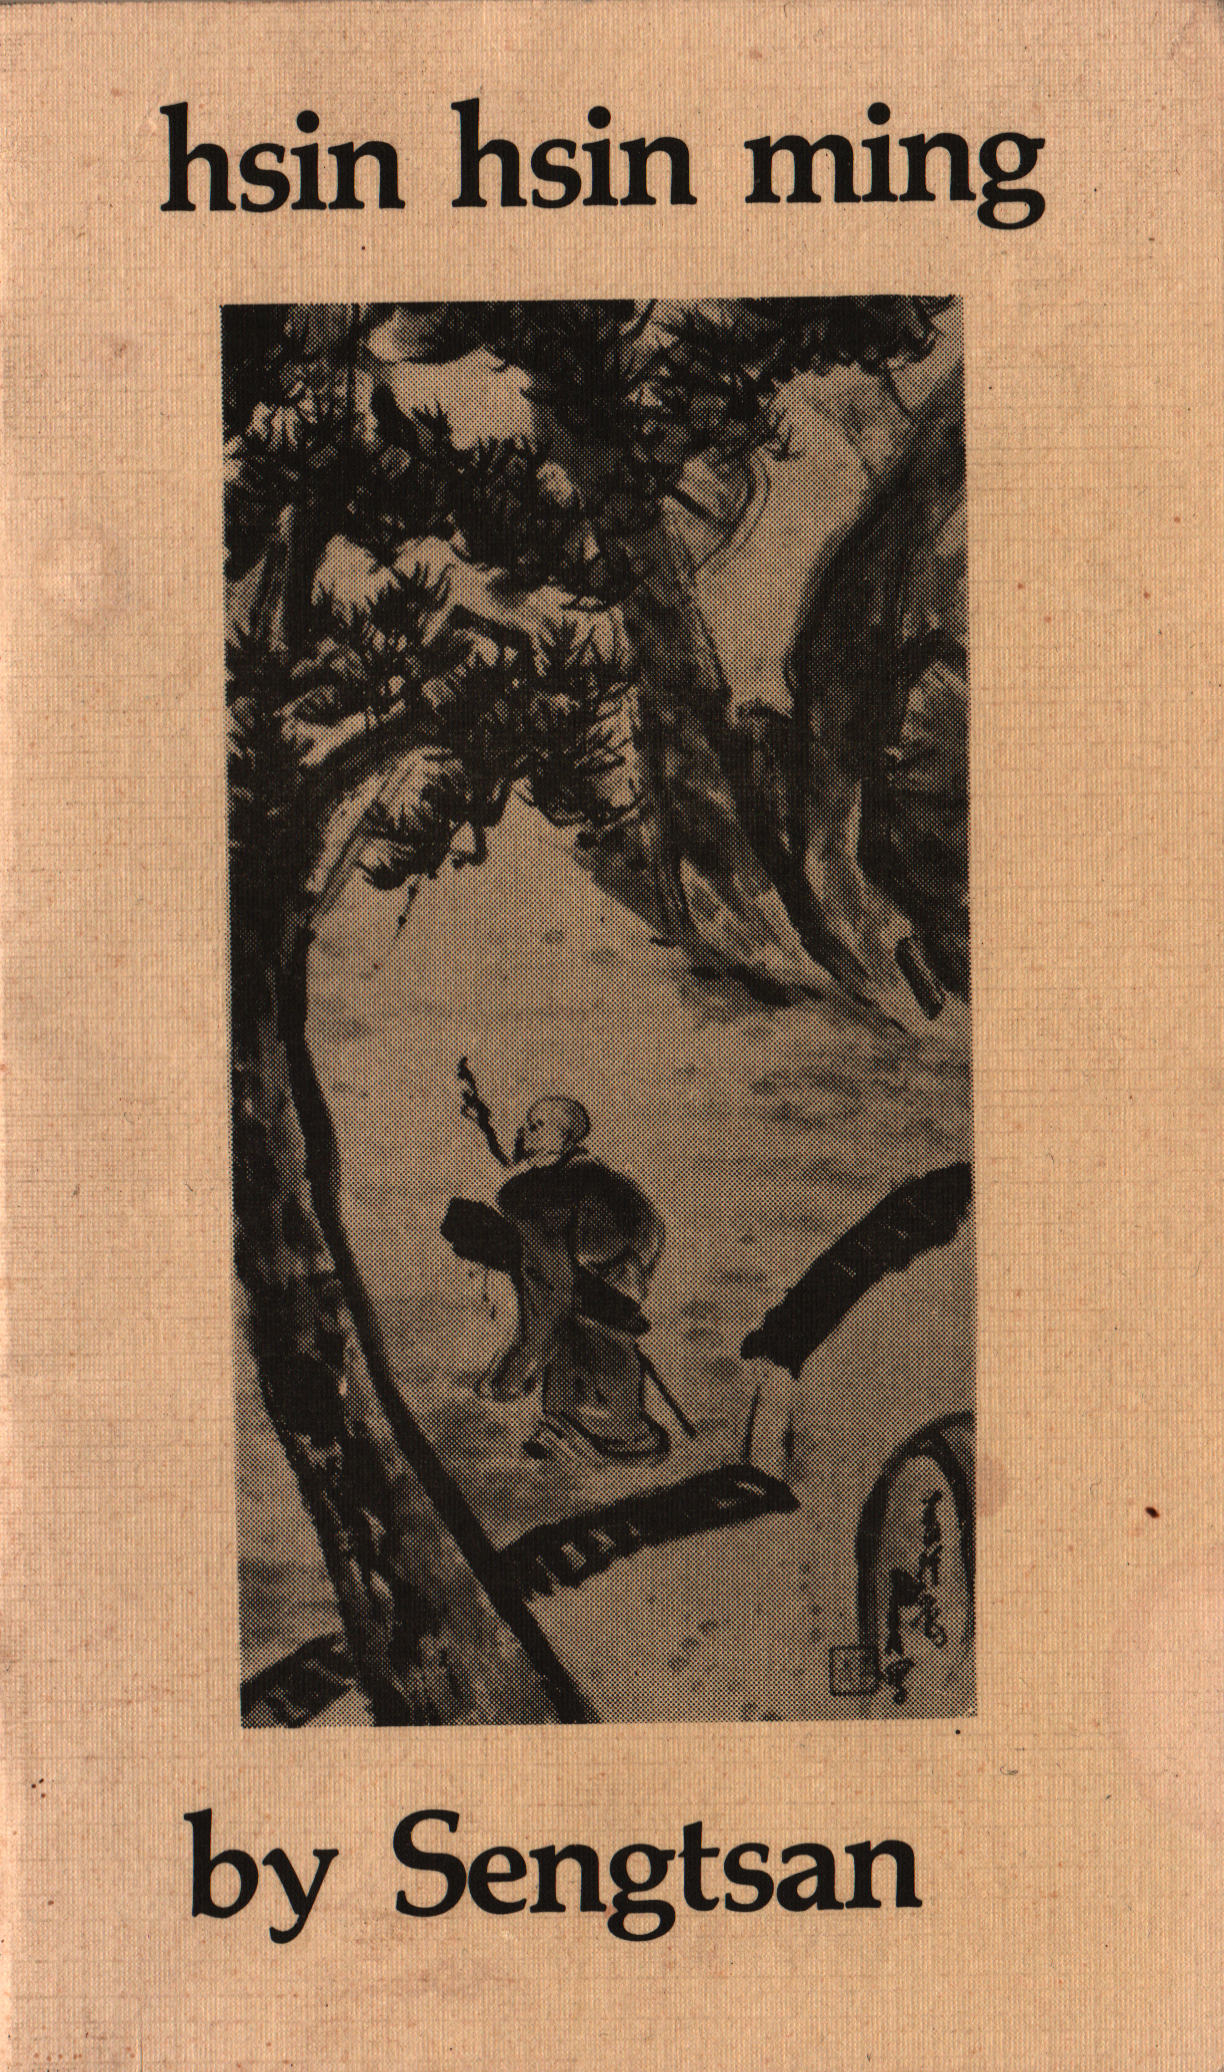 Image of Cover of the Book, Hsin Hsin Ming